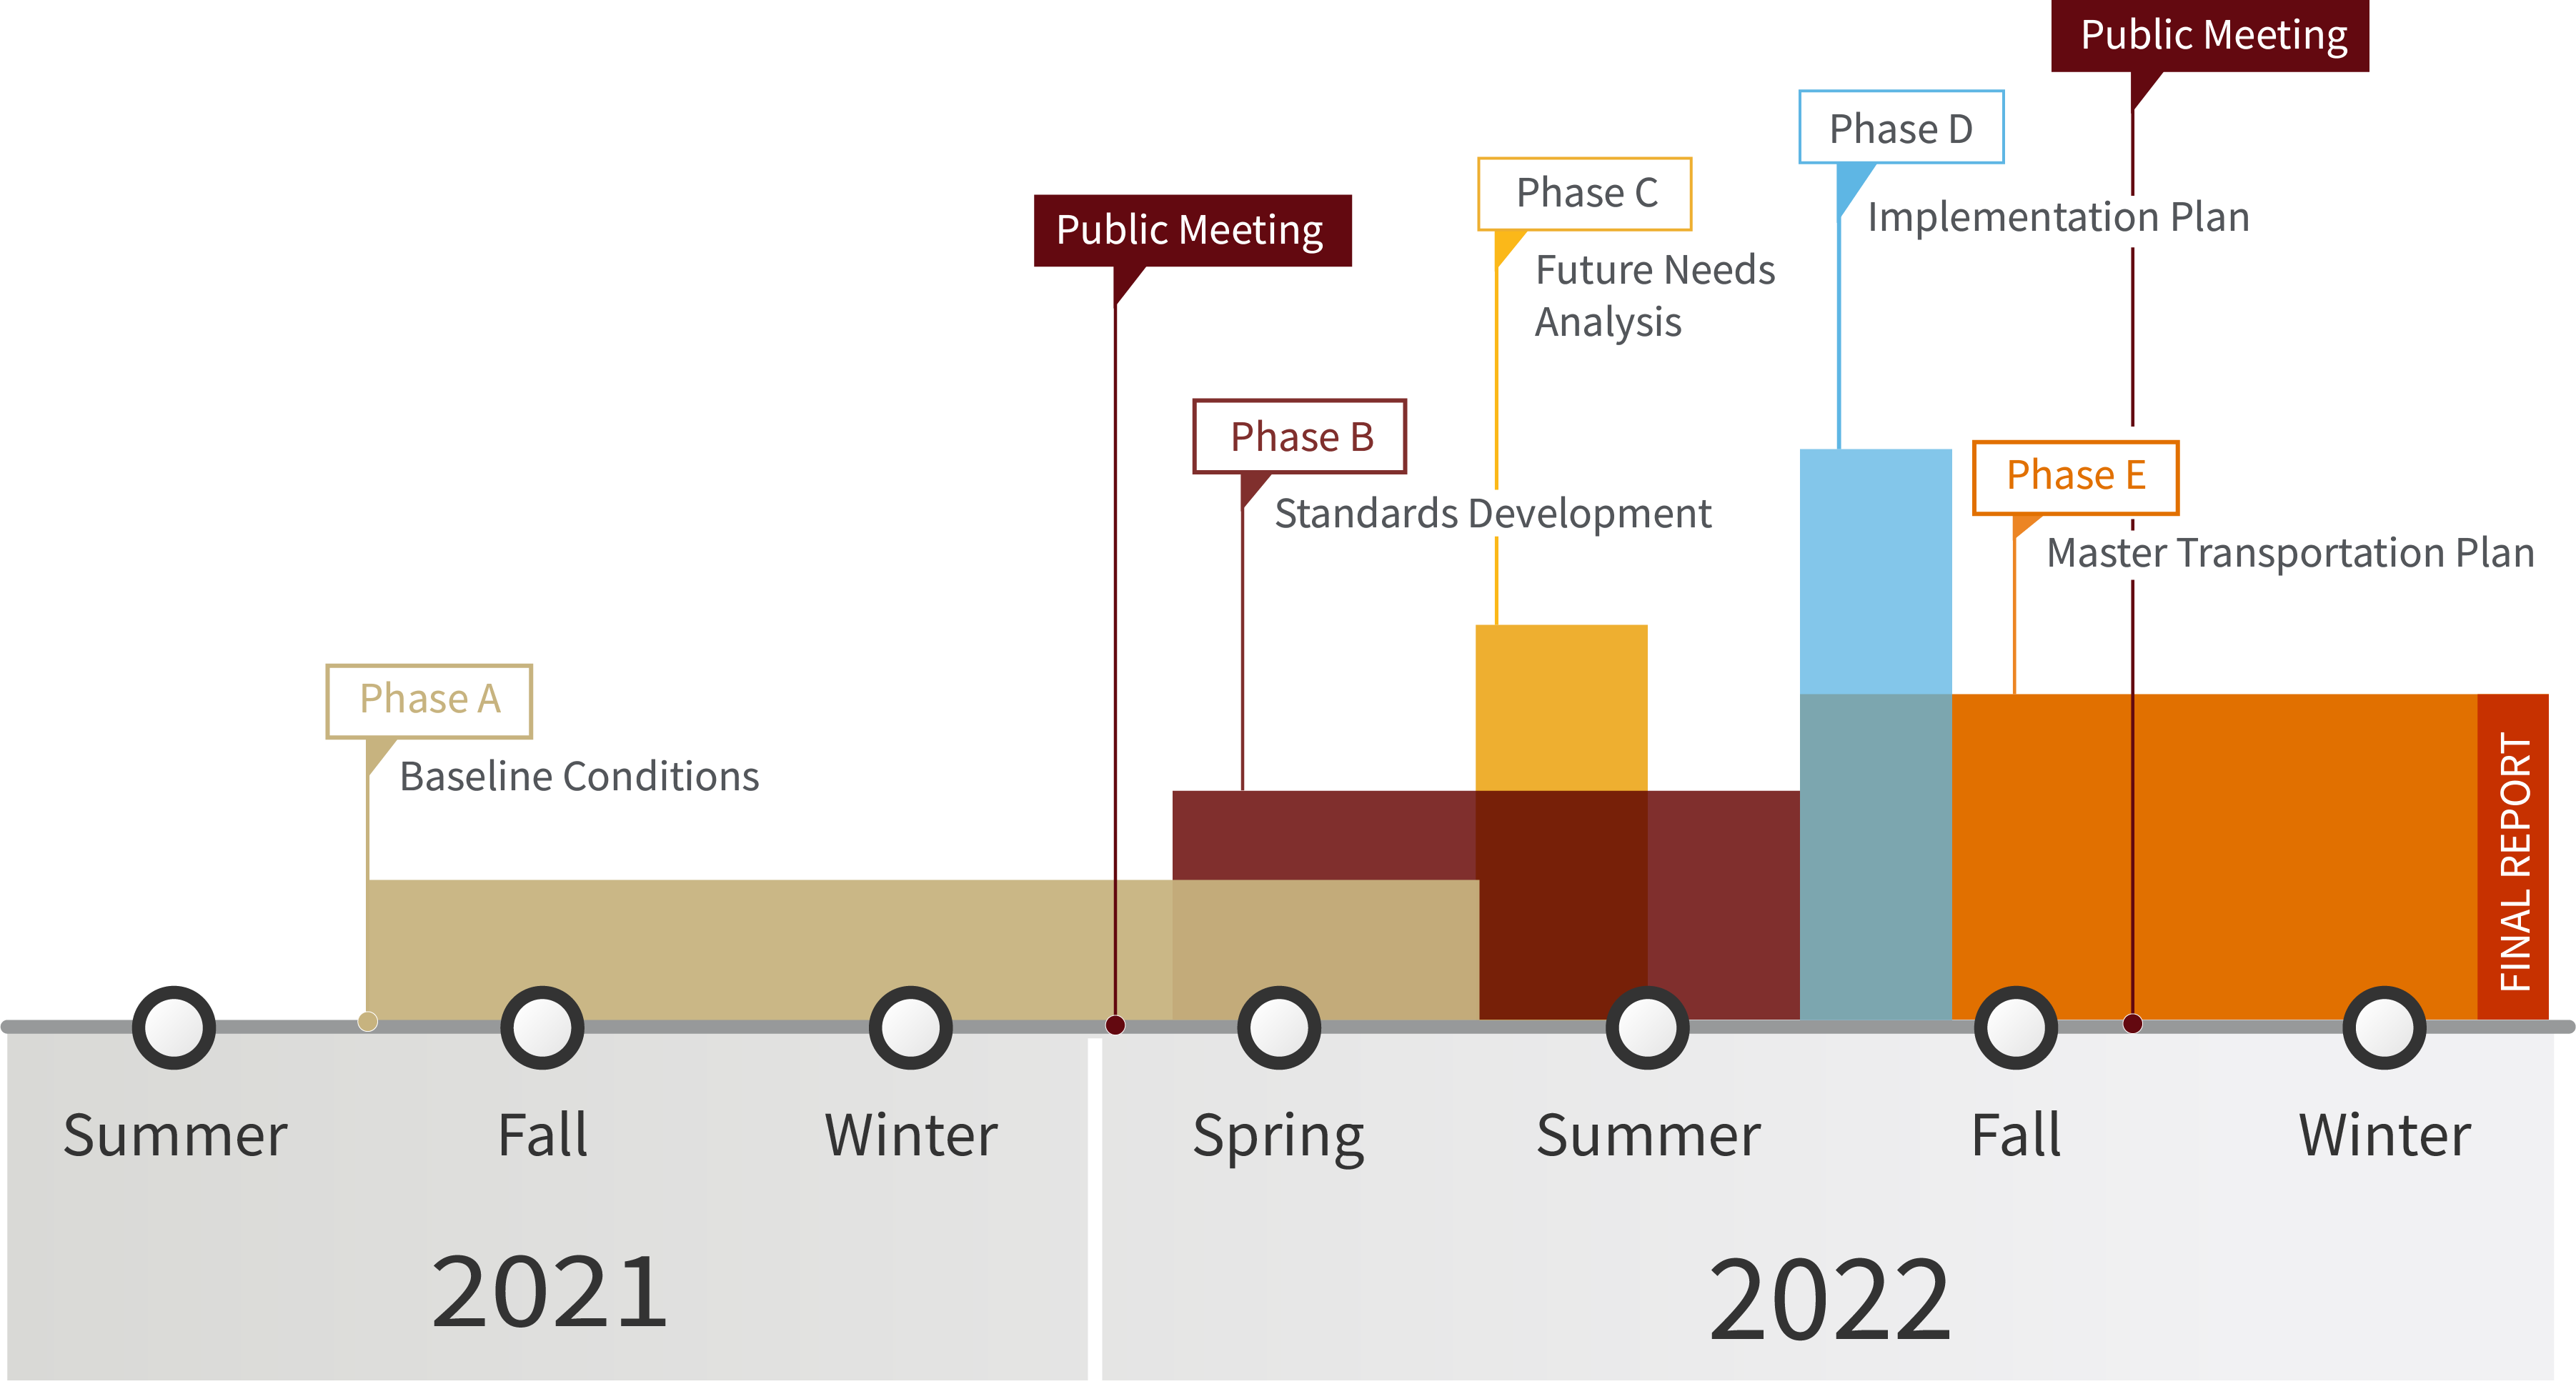 Midsummer 2021 to Late Spring 2022: Phase One, Baseline Conditions. Late Winter 2022 to midsummer 2022: Phase B, Standards Development. Mid spring 2022 to start of summer 2022: Phase c, future Needs Analysis. Late Summer 2022: Phase D, Implementation plan. Fall to Winder 2022: Phase E, master transportation plan. Eneds with final report.